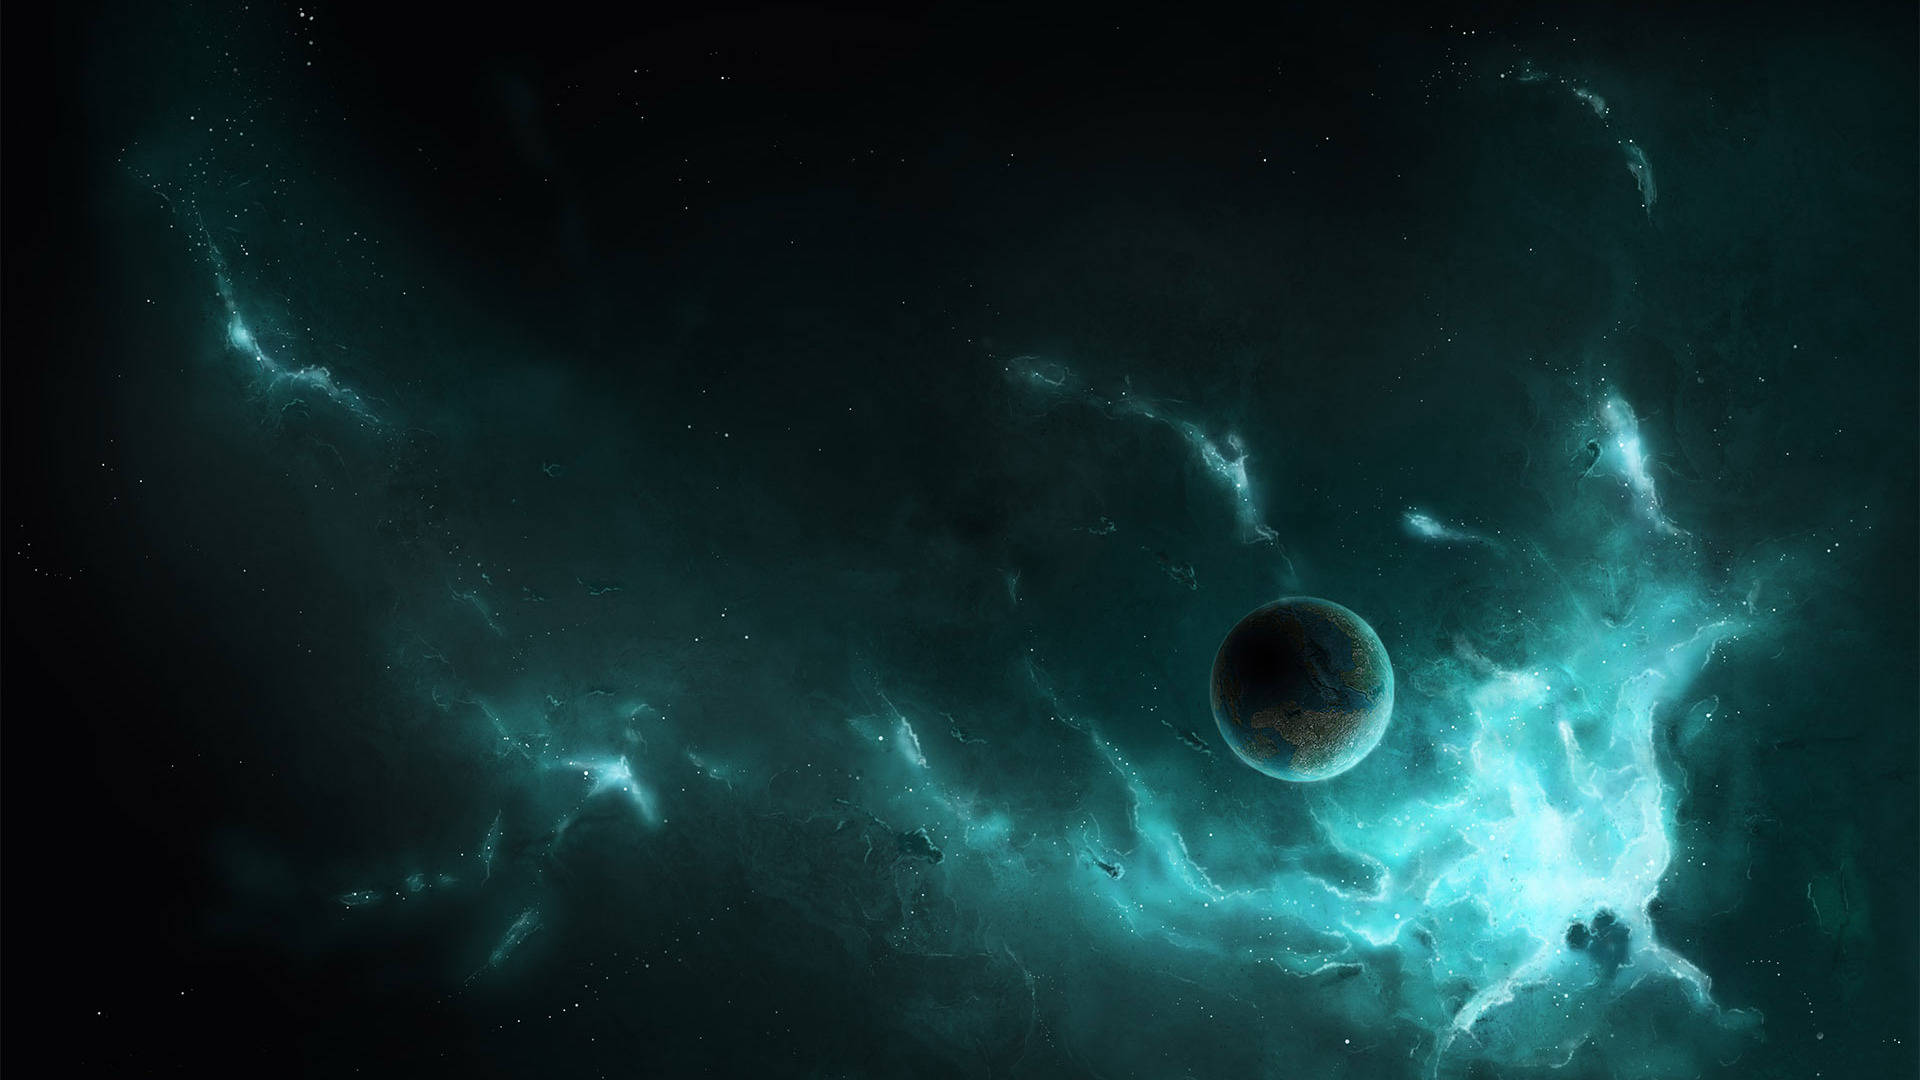 Teal Sky And Planet Wallpaper